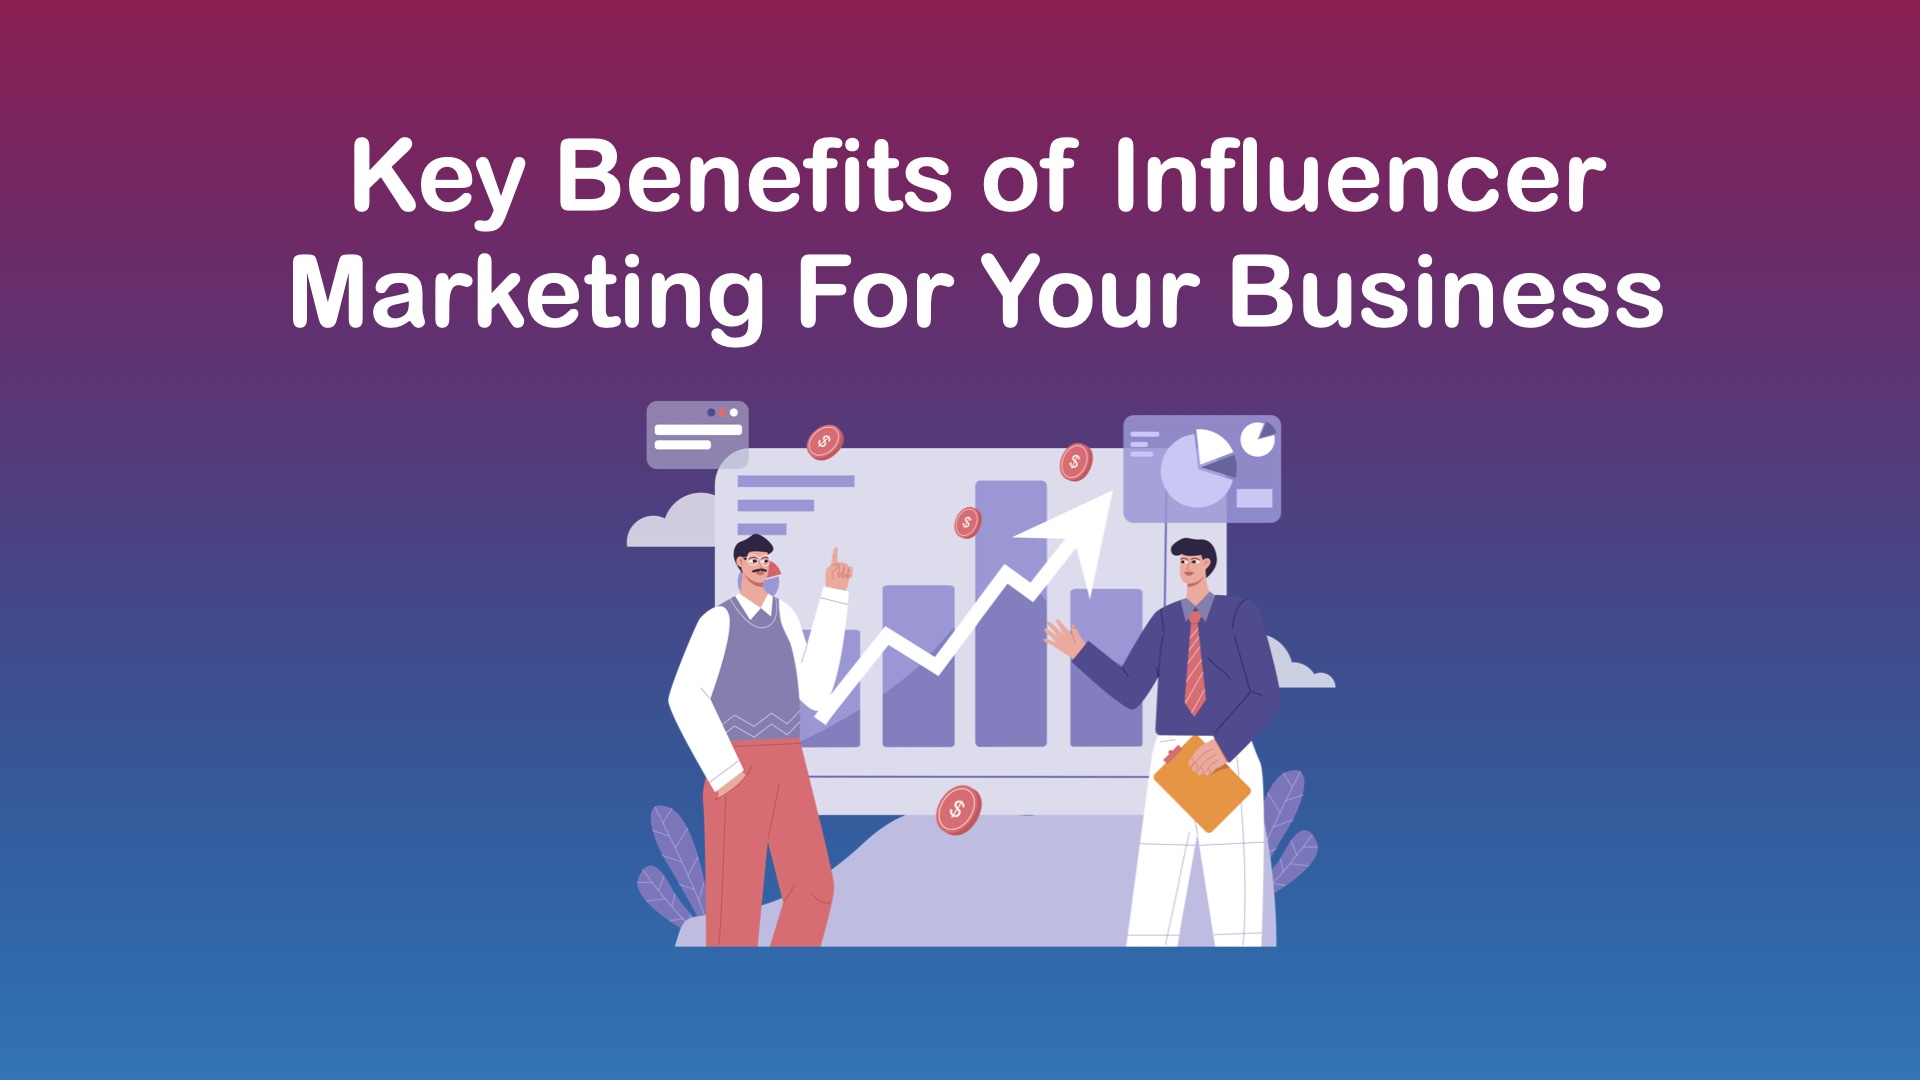 Key Benefits of Influencer Marketing For Your Business